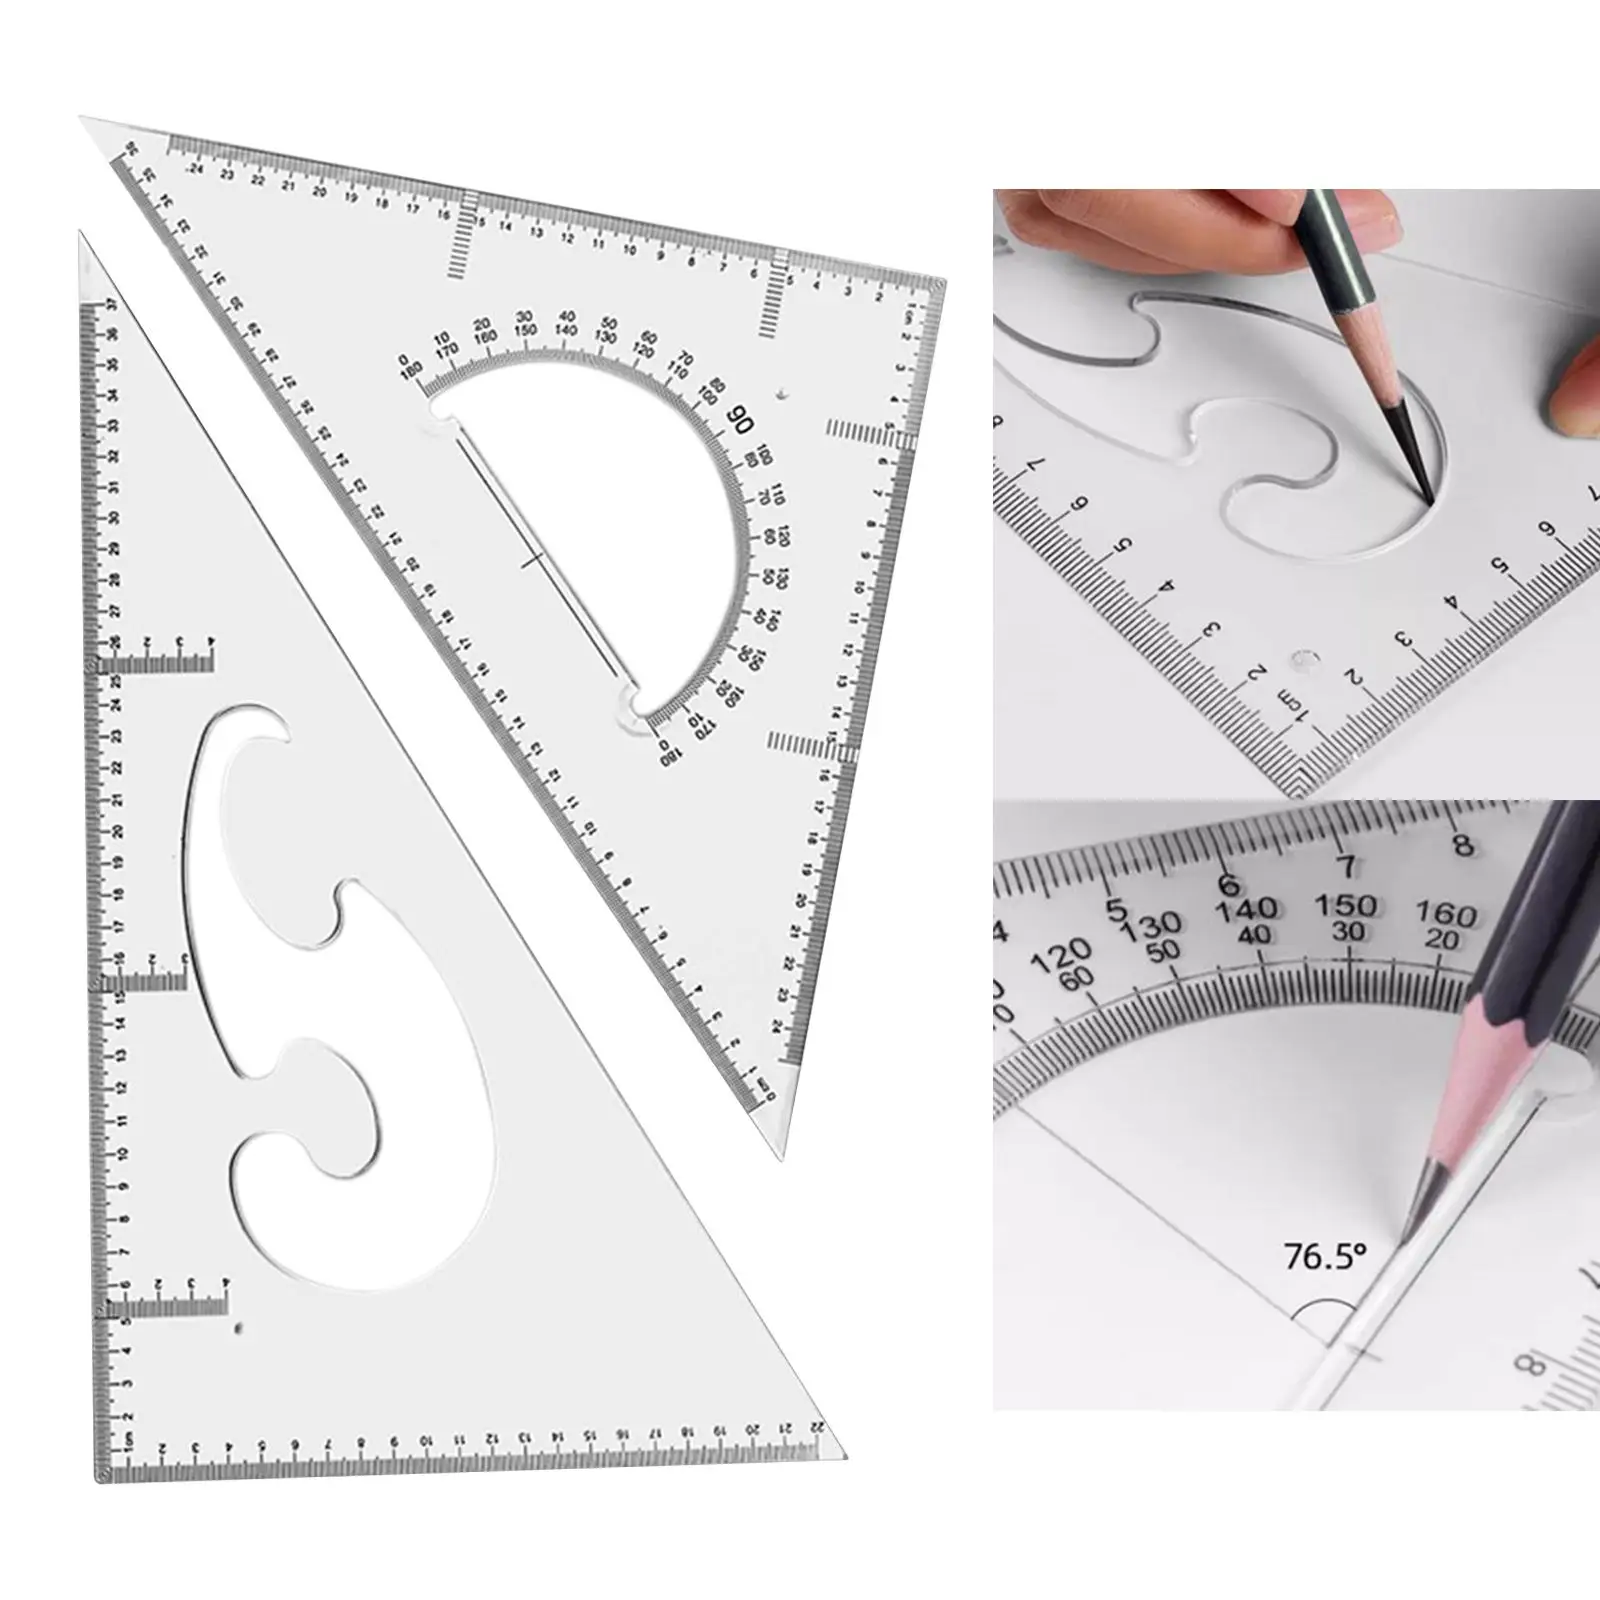 2x Triangle Ruler Square Geometry Rulers Professional Measuring Ruler Stationery for Carpentry Artists Engineer Design Teaching